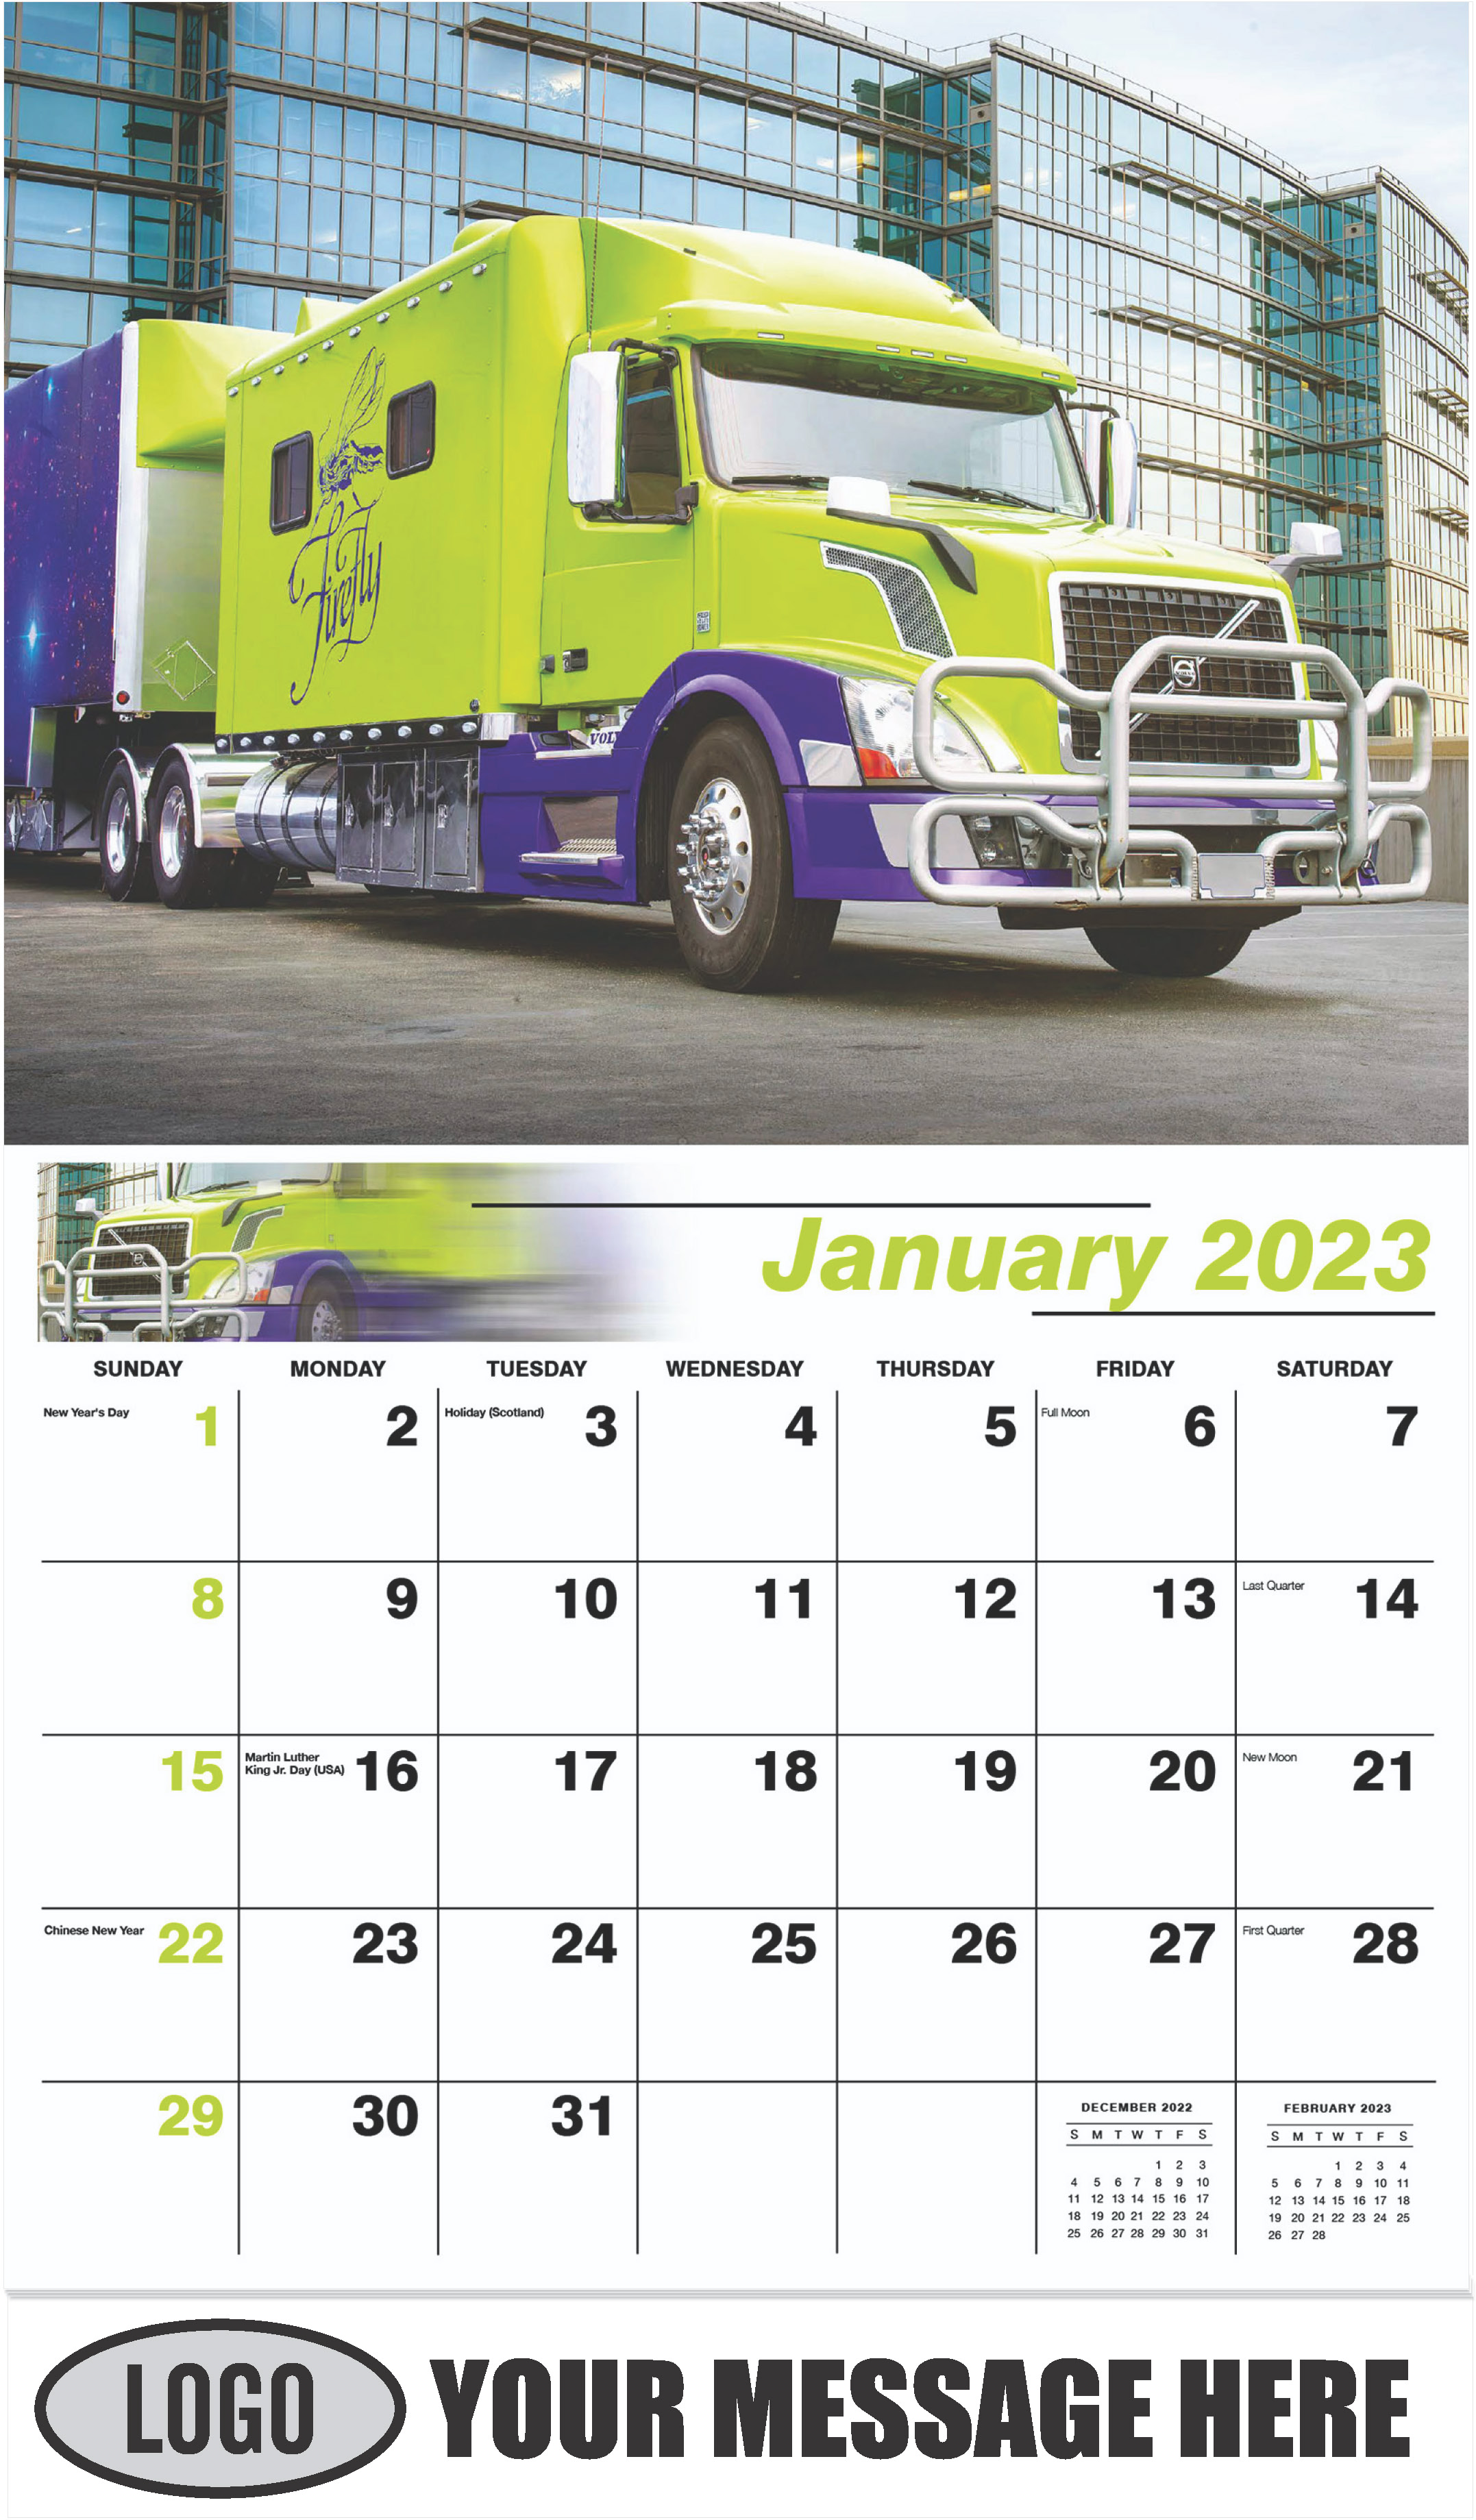 2015 Volvo - January - Kings of the Road 2023 Promotional Calendar